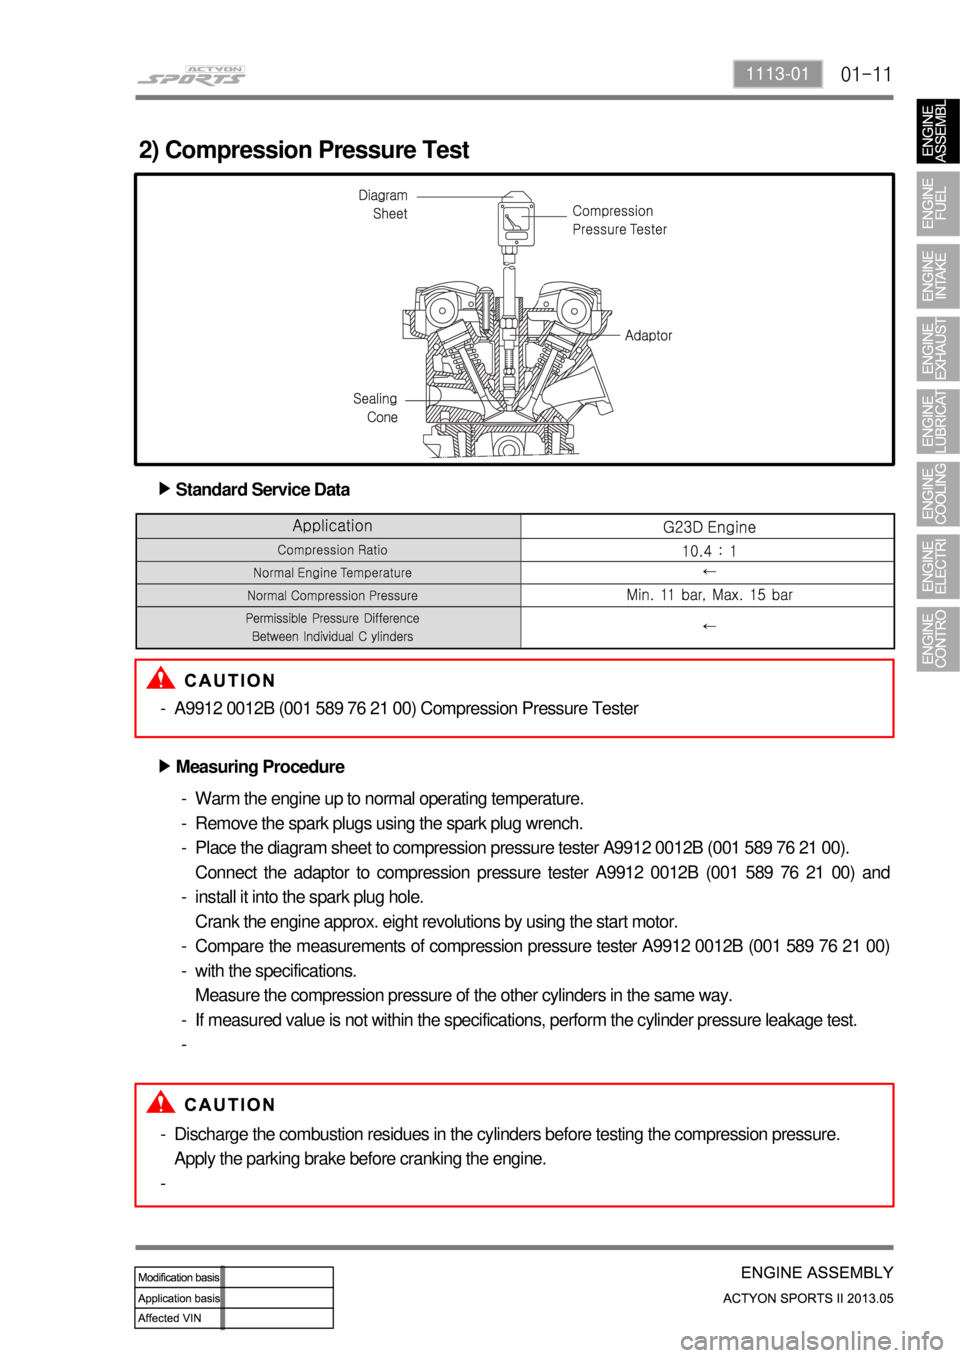 SSANGYONG NEW ACTYON SPORTS 2013  Service Manual 01-111113-01
2) Compression Pressure Test
Standard Service Data ▶
A9912 0012B (001 589 76 21 00) Compression Pressure Tester -
Measuring Procedure ▶
Warm the engine up to normal operating temperat